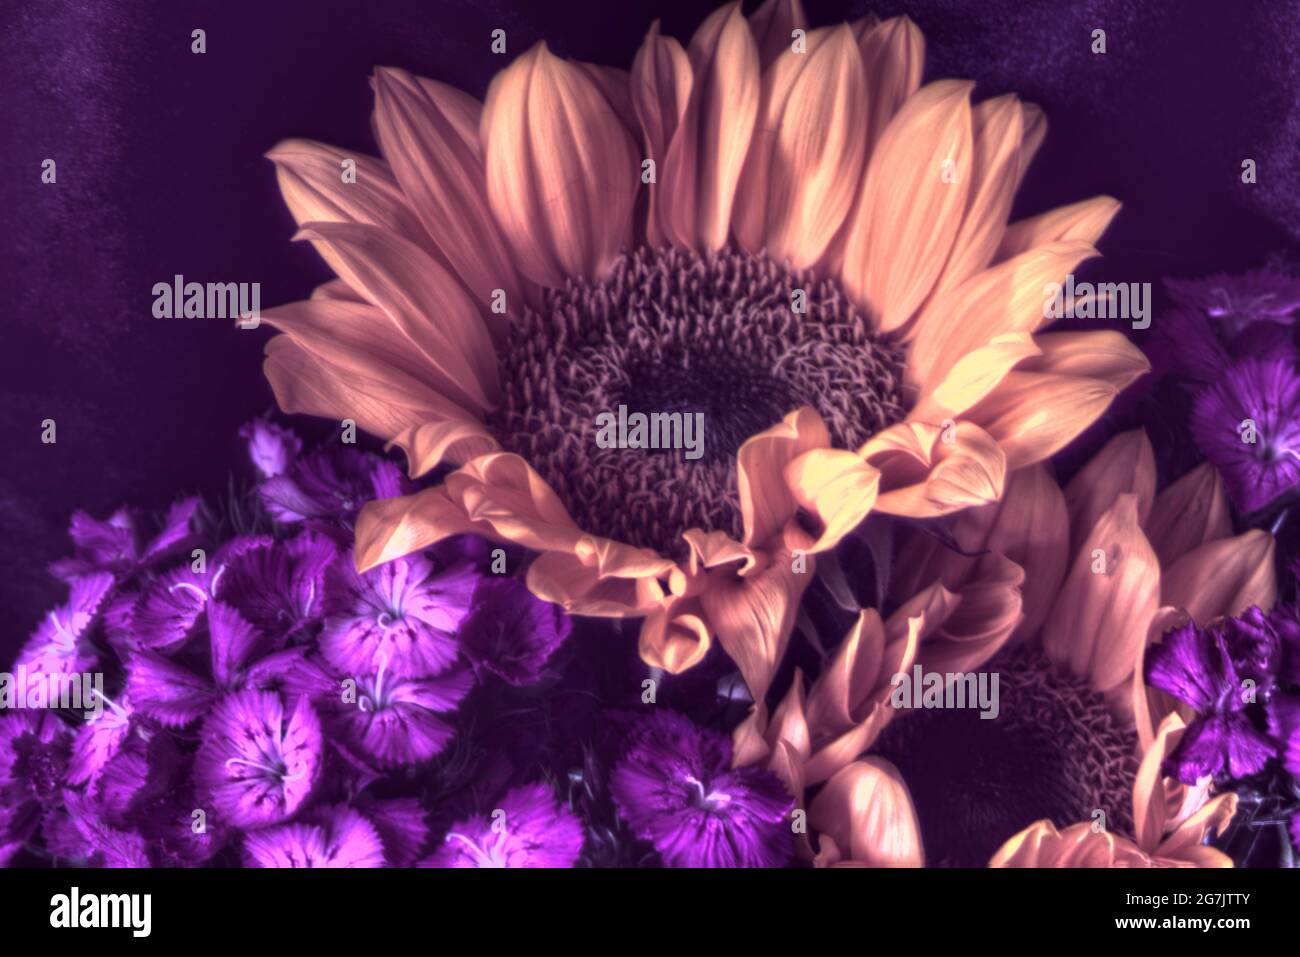 High Dynamic Range photo of yellow sunflowers (Helianthus) and purple dianthus flowers, giving the impression of a painting. Stock Photo